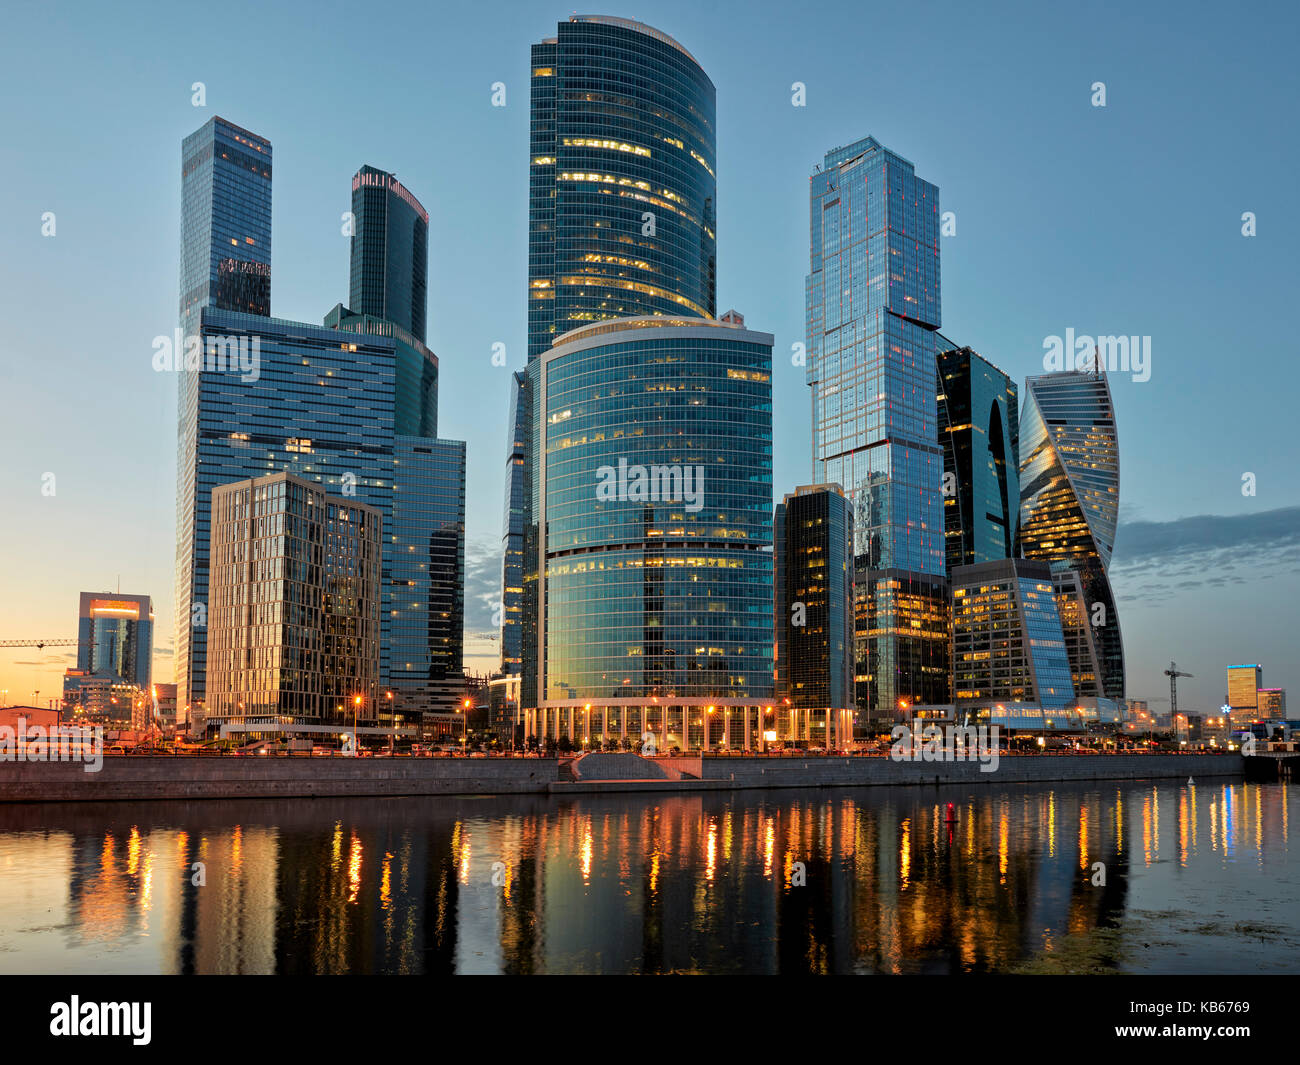 The Moscow International Business Centre (MIBC), also known as “Moscow City', at dusk. Moscow, Russia. Stock Photo